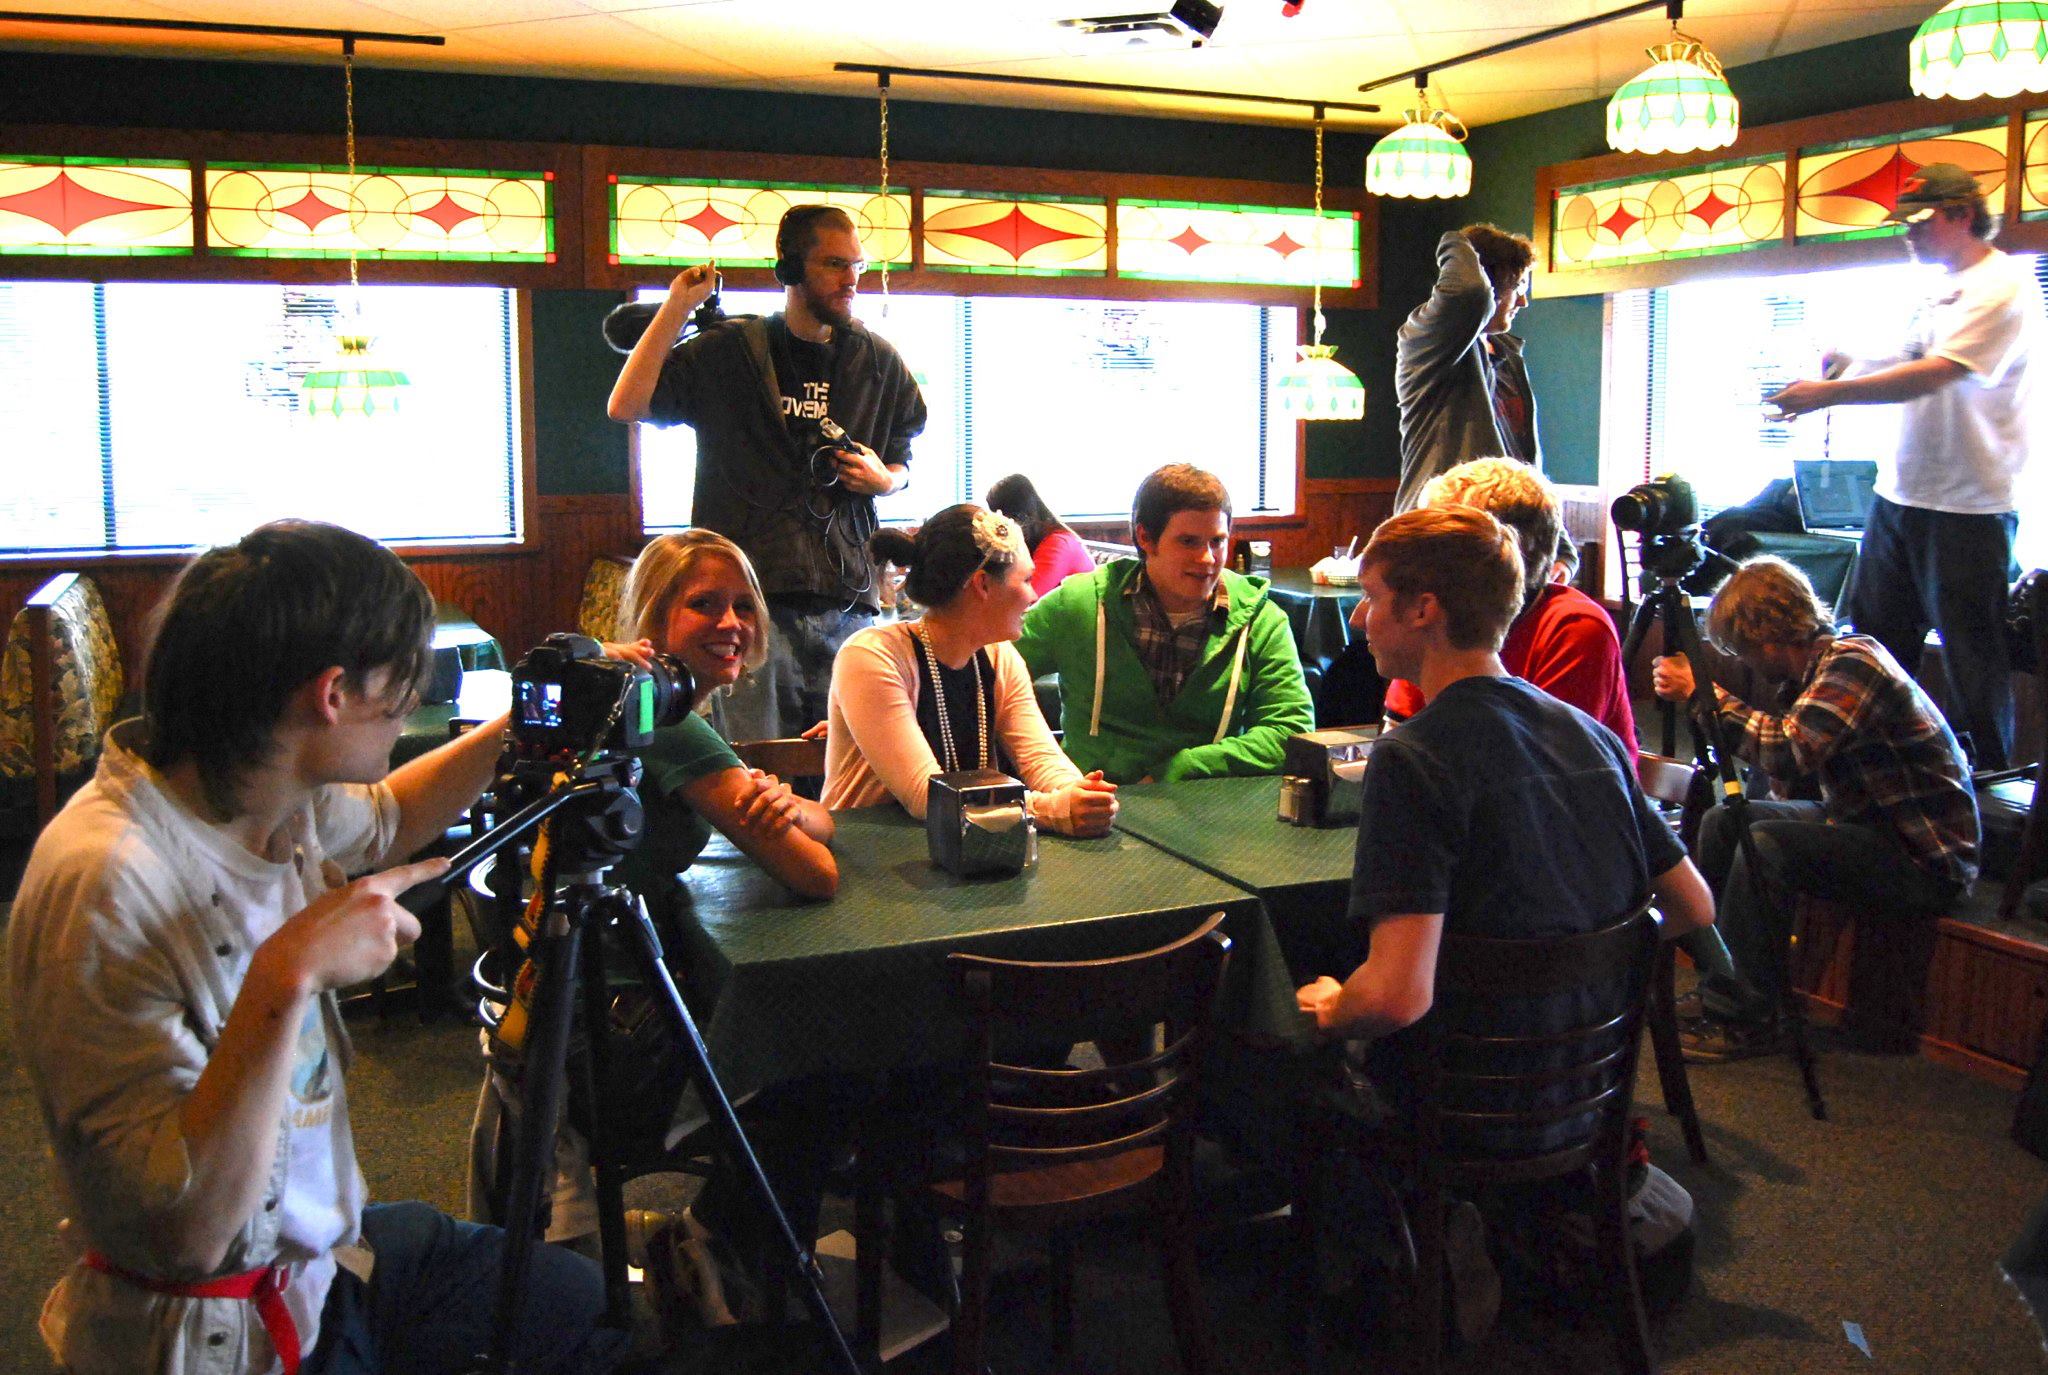  Shooting "This Loneliness" (photo courtesy of Michelle Chabot) 